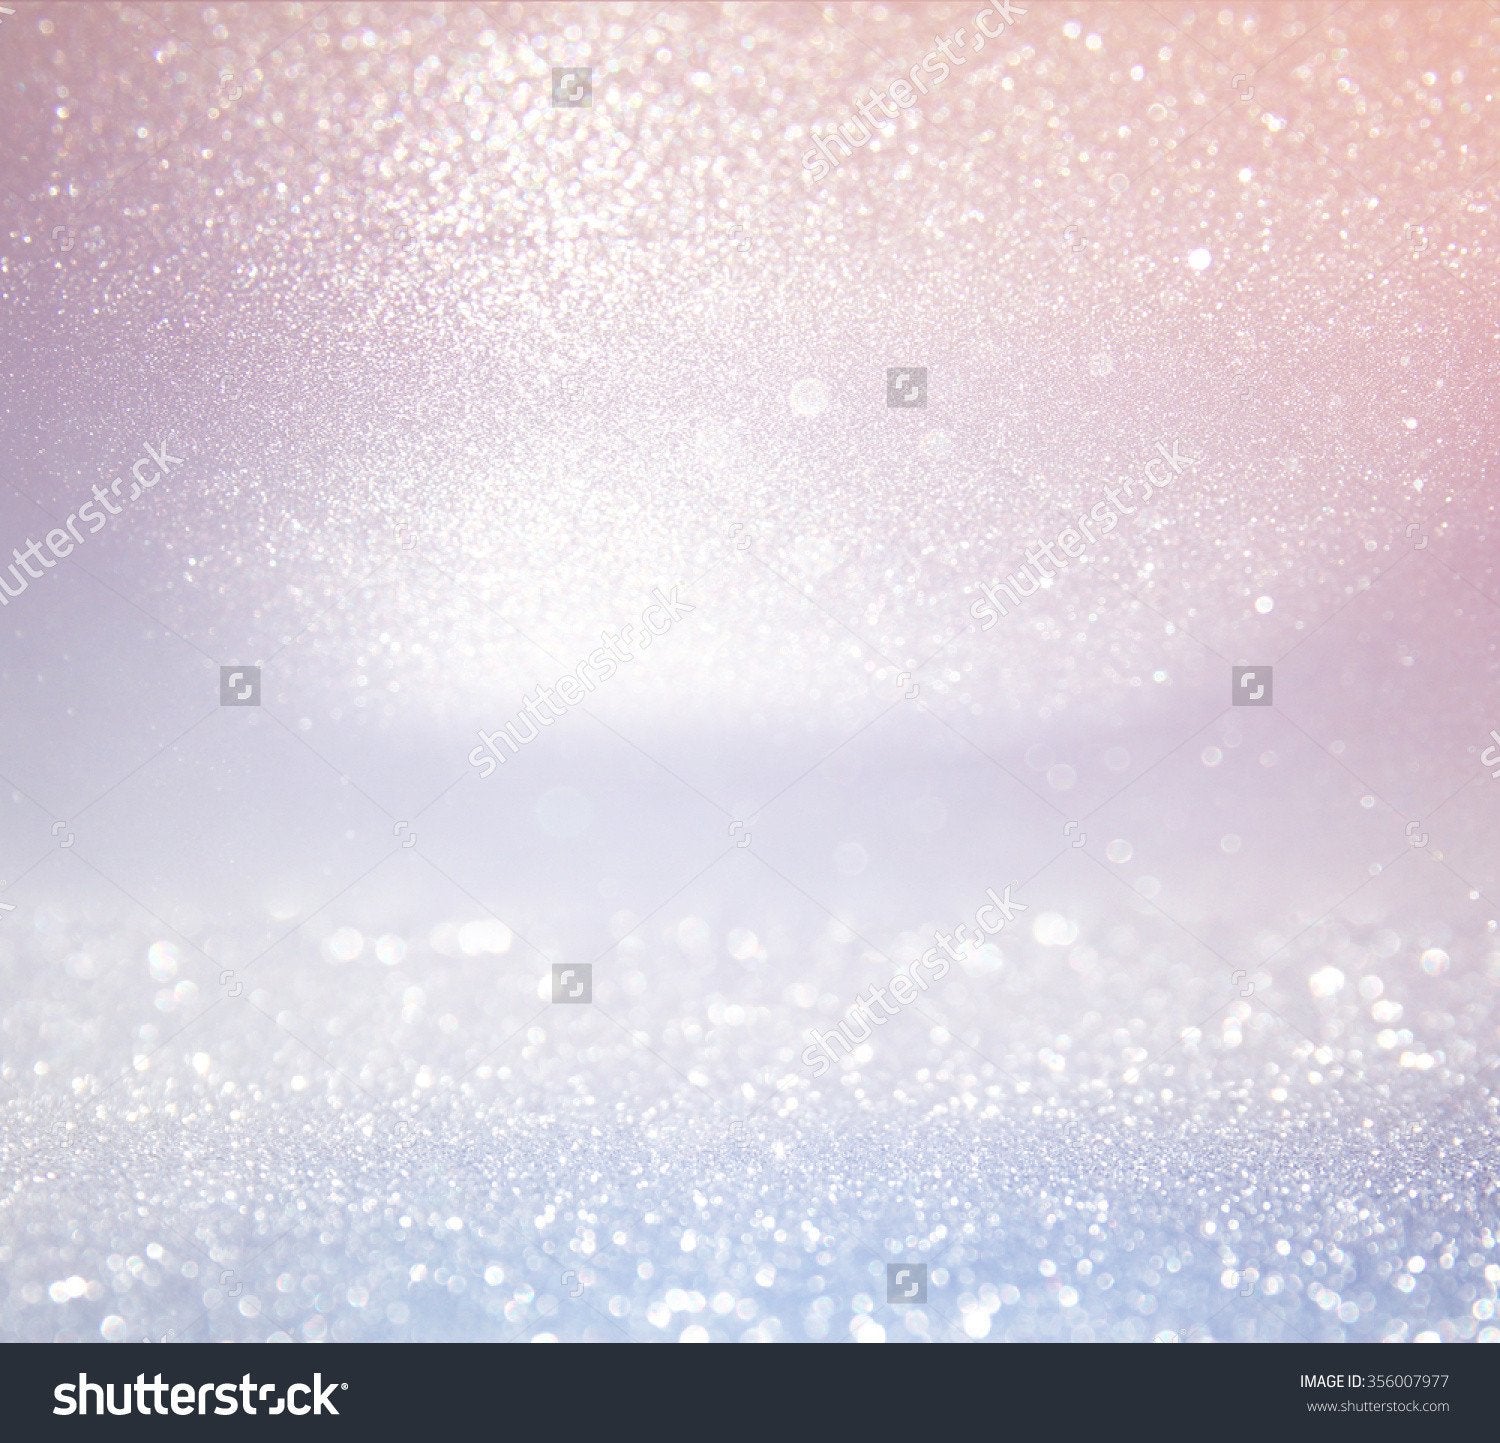 Light Silver and Pink Glitter Print Photography Backdrop